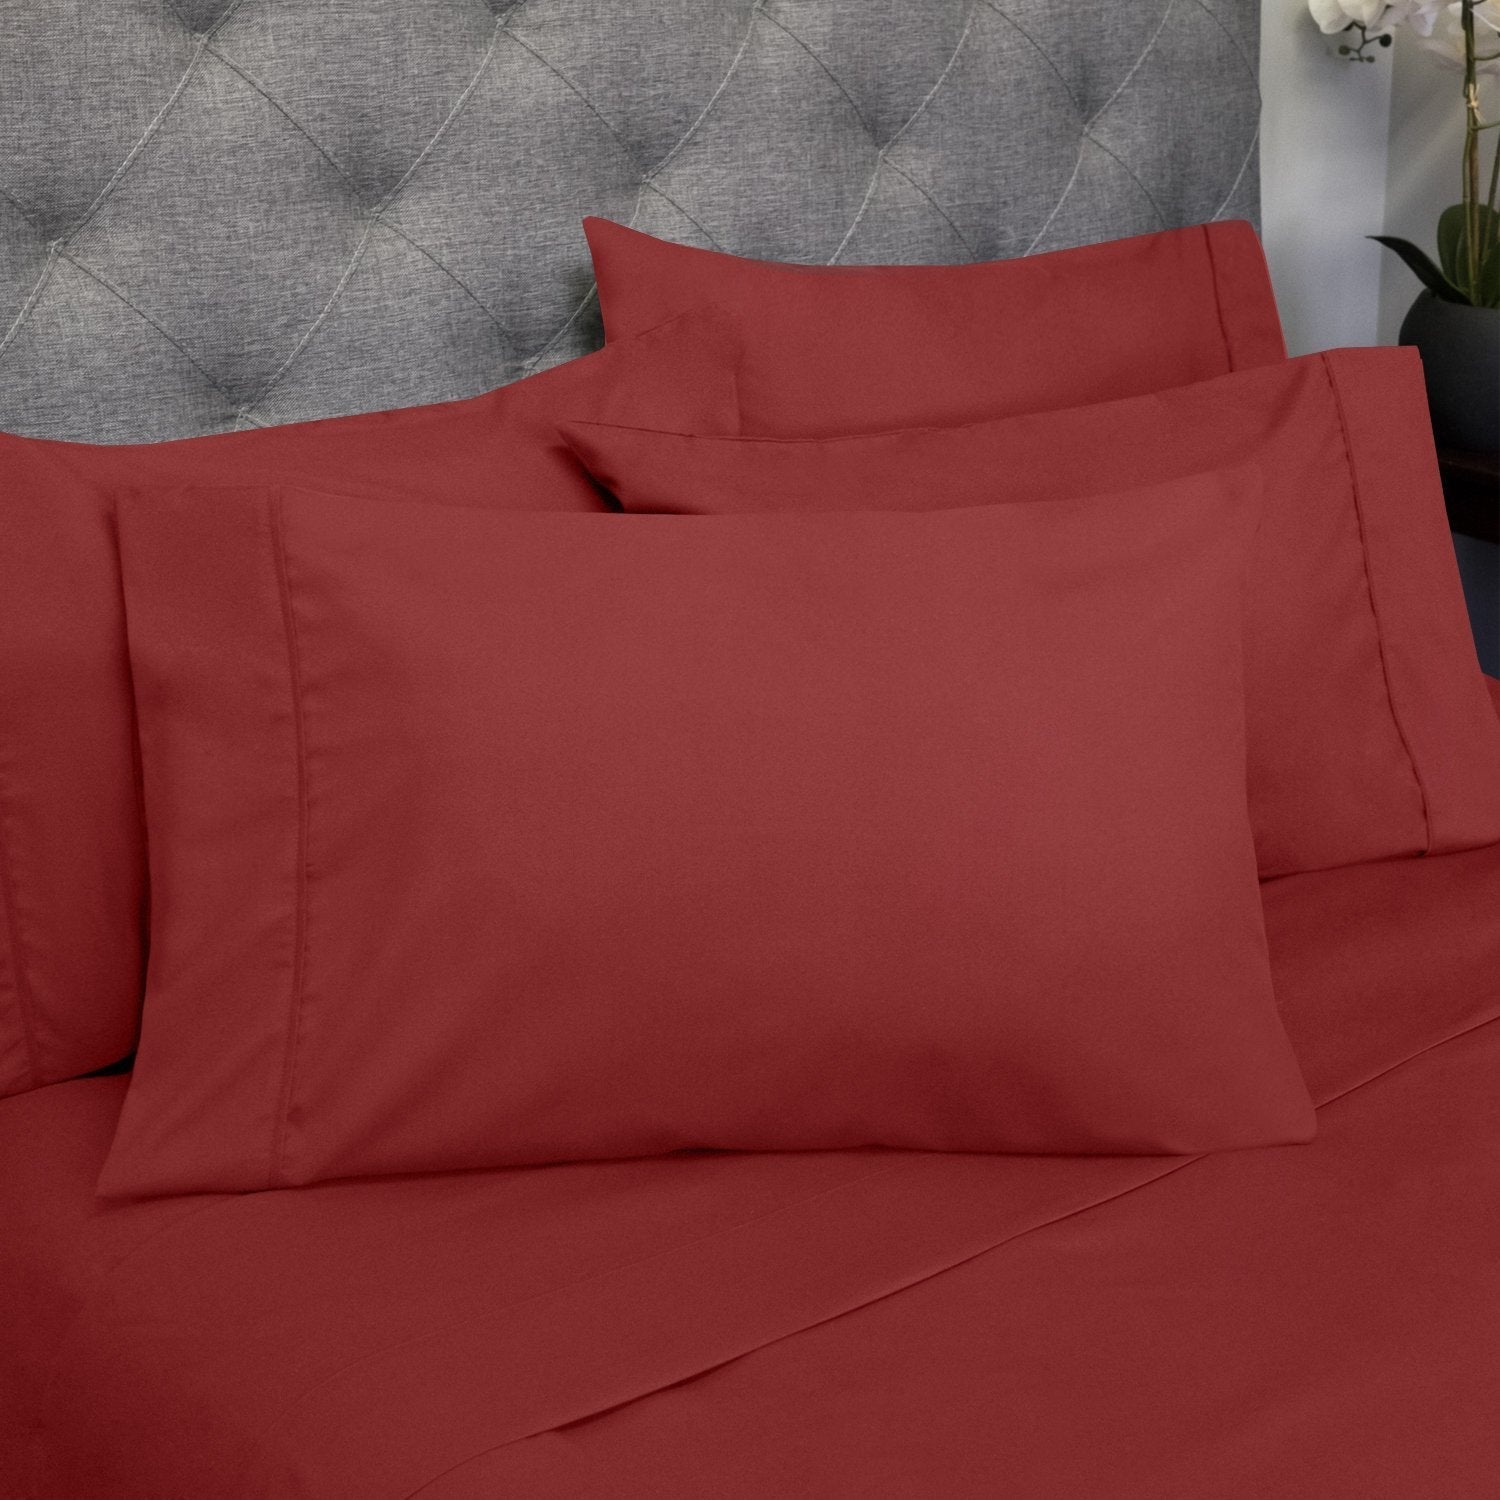 Deluxe 6-Piece Bed Sheet Set (Burgundy) - Pillowcases